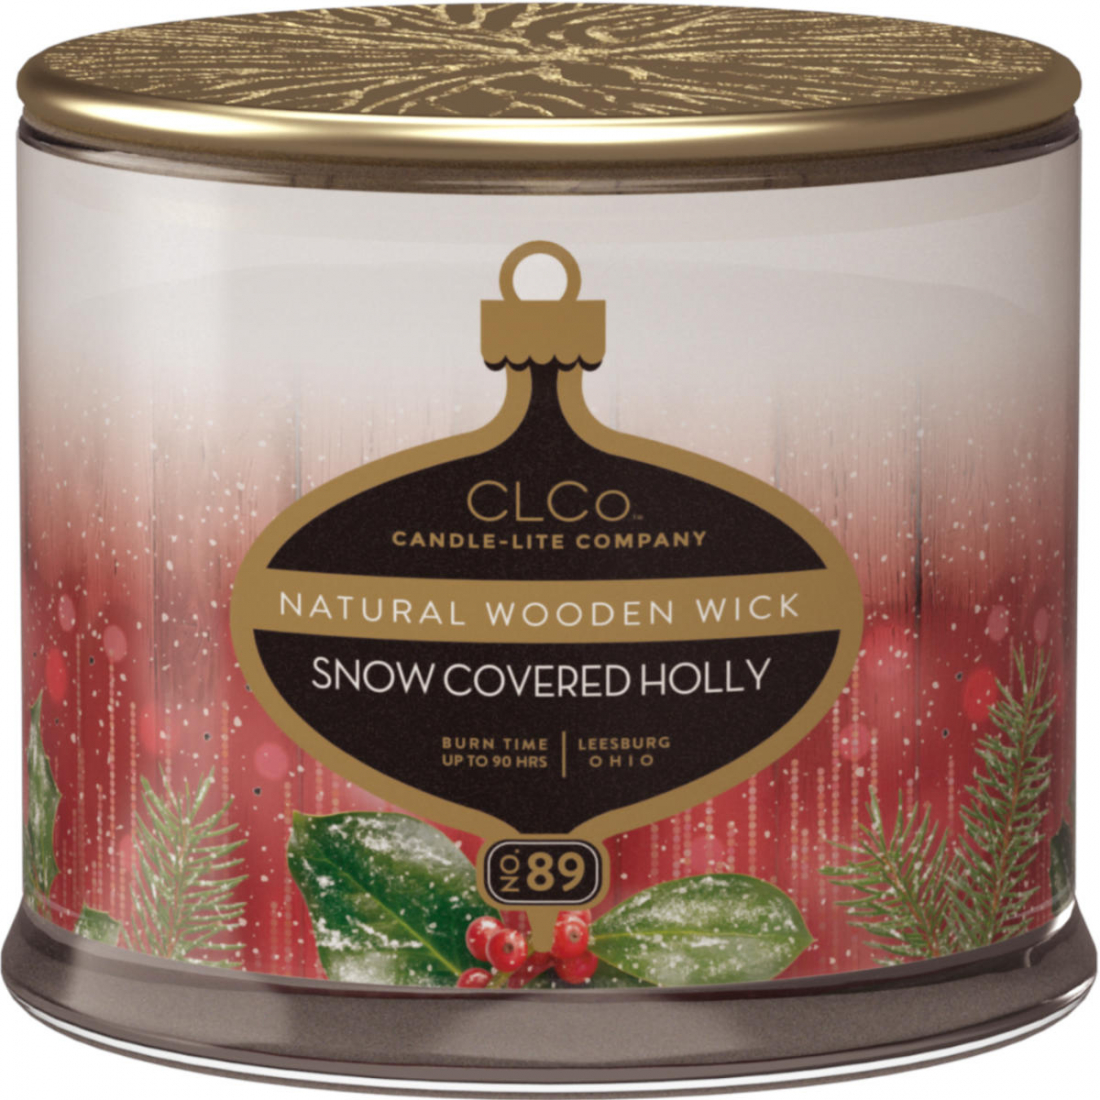 'Snow Covered Holly' Scented Candle - 396 g